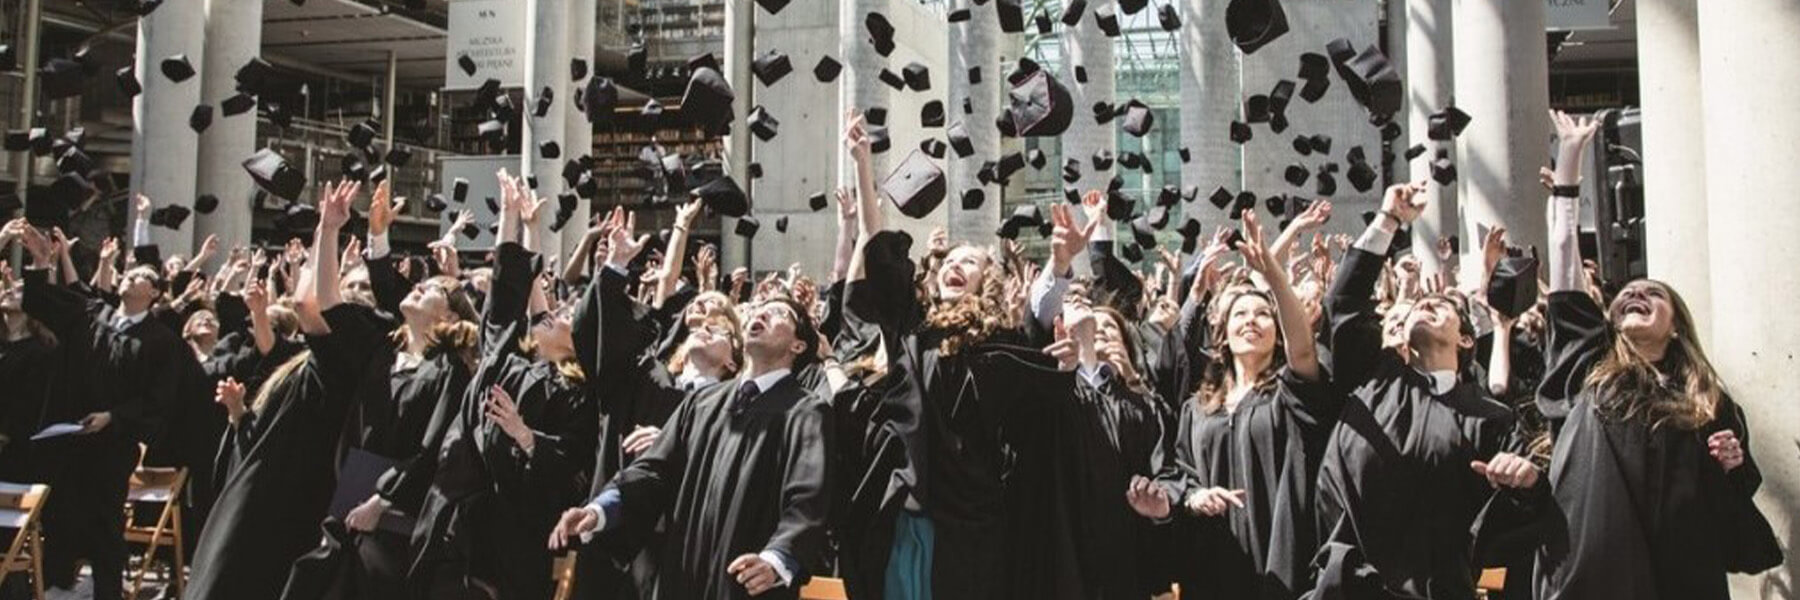 a class of graduates throwing their graduation hats into the air to celebrate